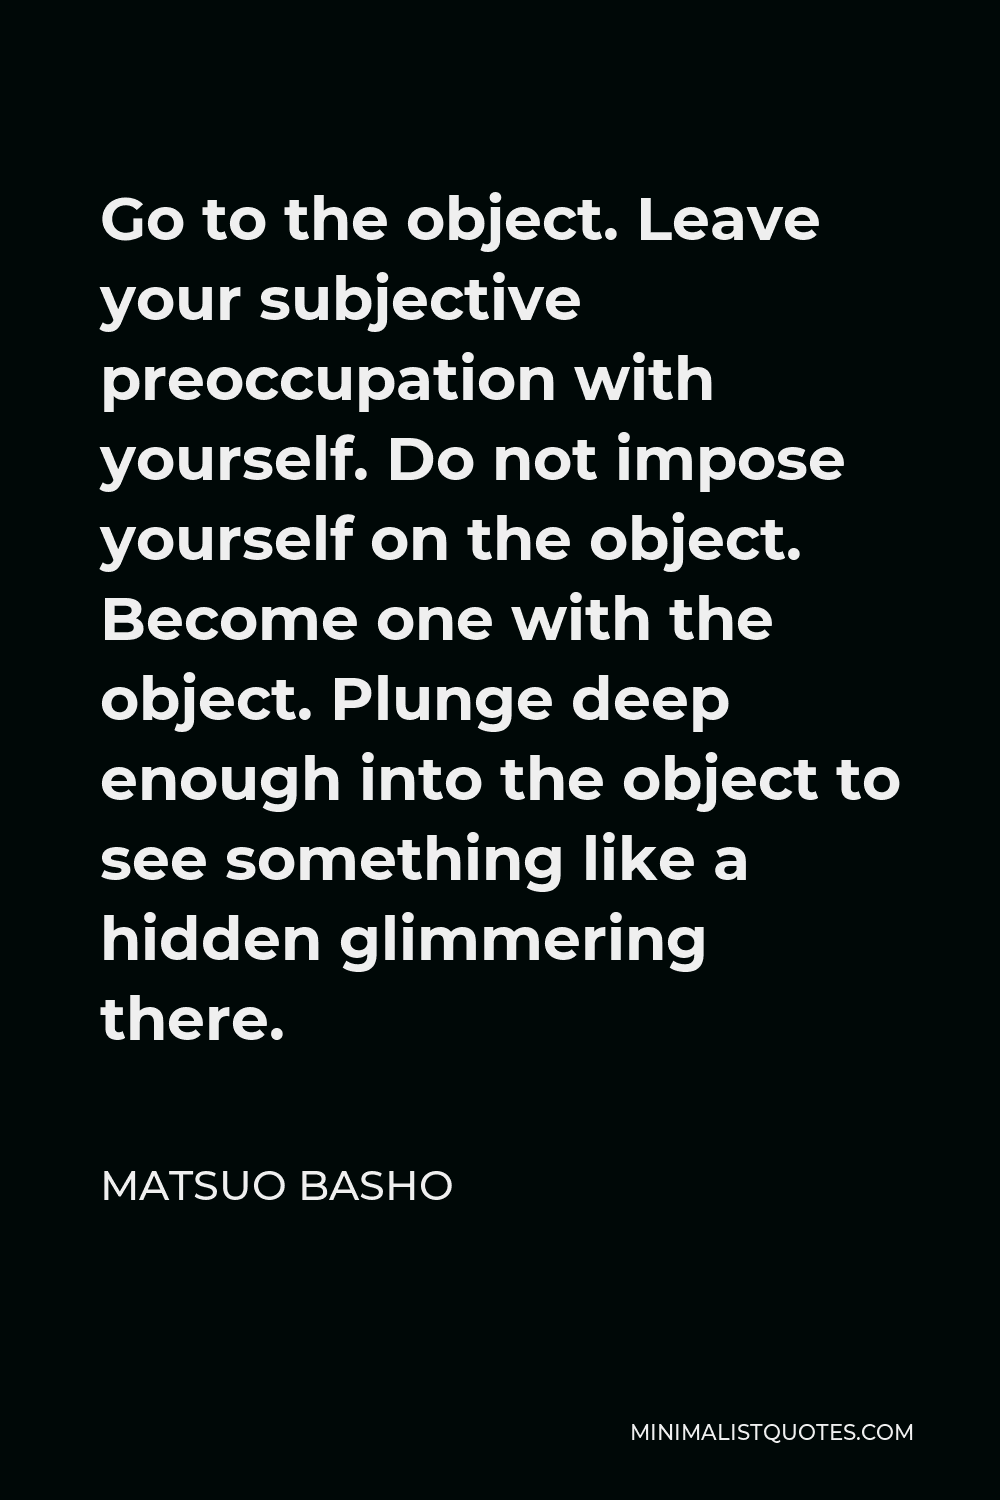 Matsuo Basho Quote - Go to the object. Leave your subjective preoccupation with yourself. Do not impose yourself on the object. Become one with the object. Plunge deep enough into the object to see something like a hidden glimmering there.